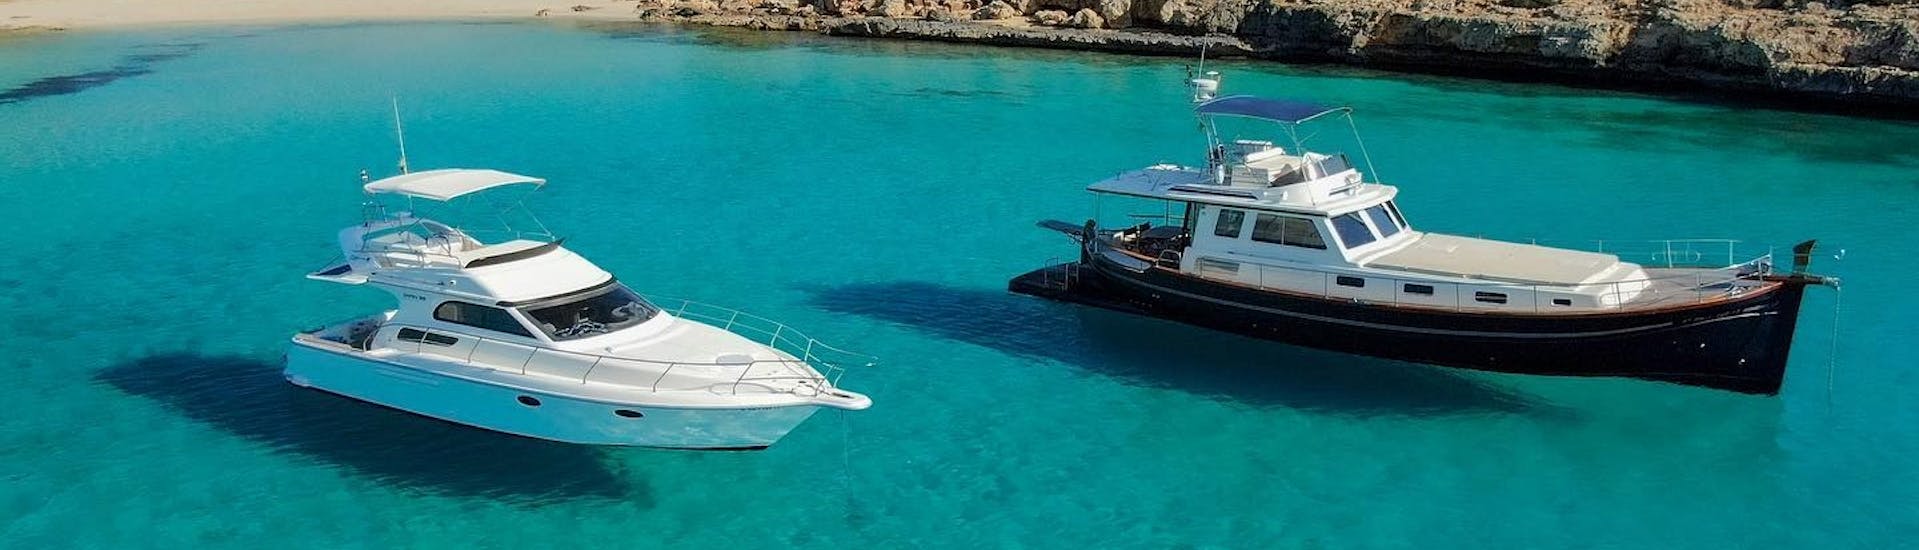 Our yacht sailing during a Private Yacht Trip to Cala Varques & Cala Virgili with Charters Llevant.